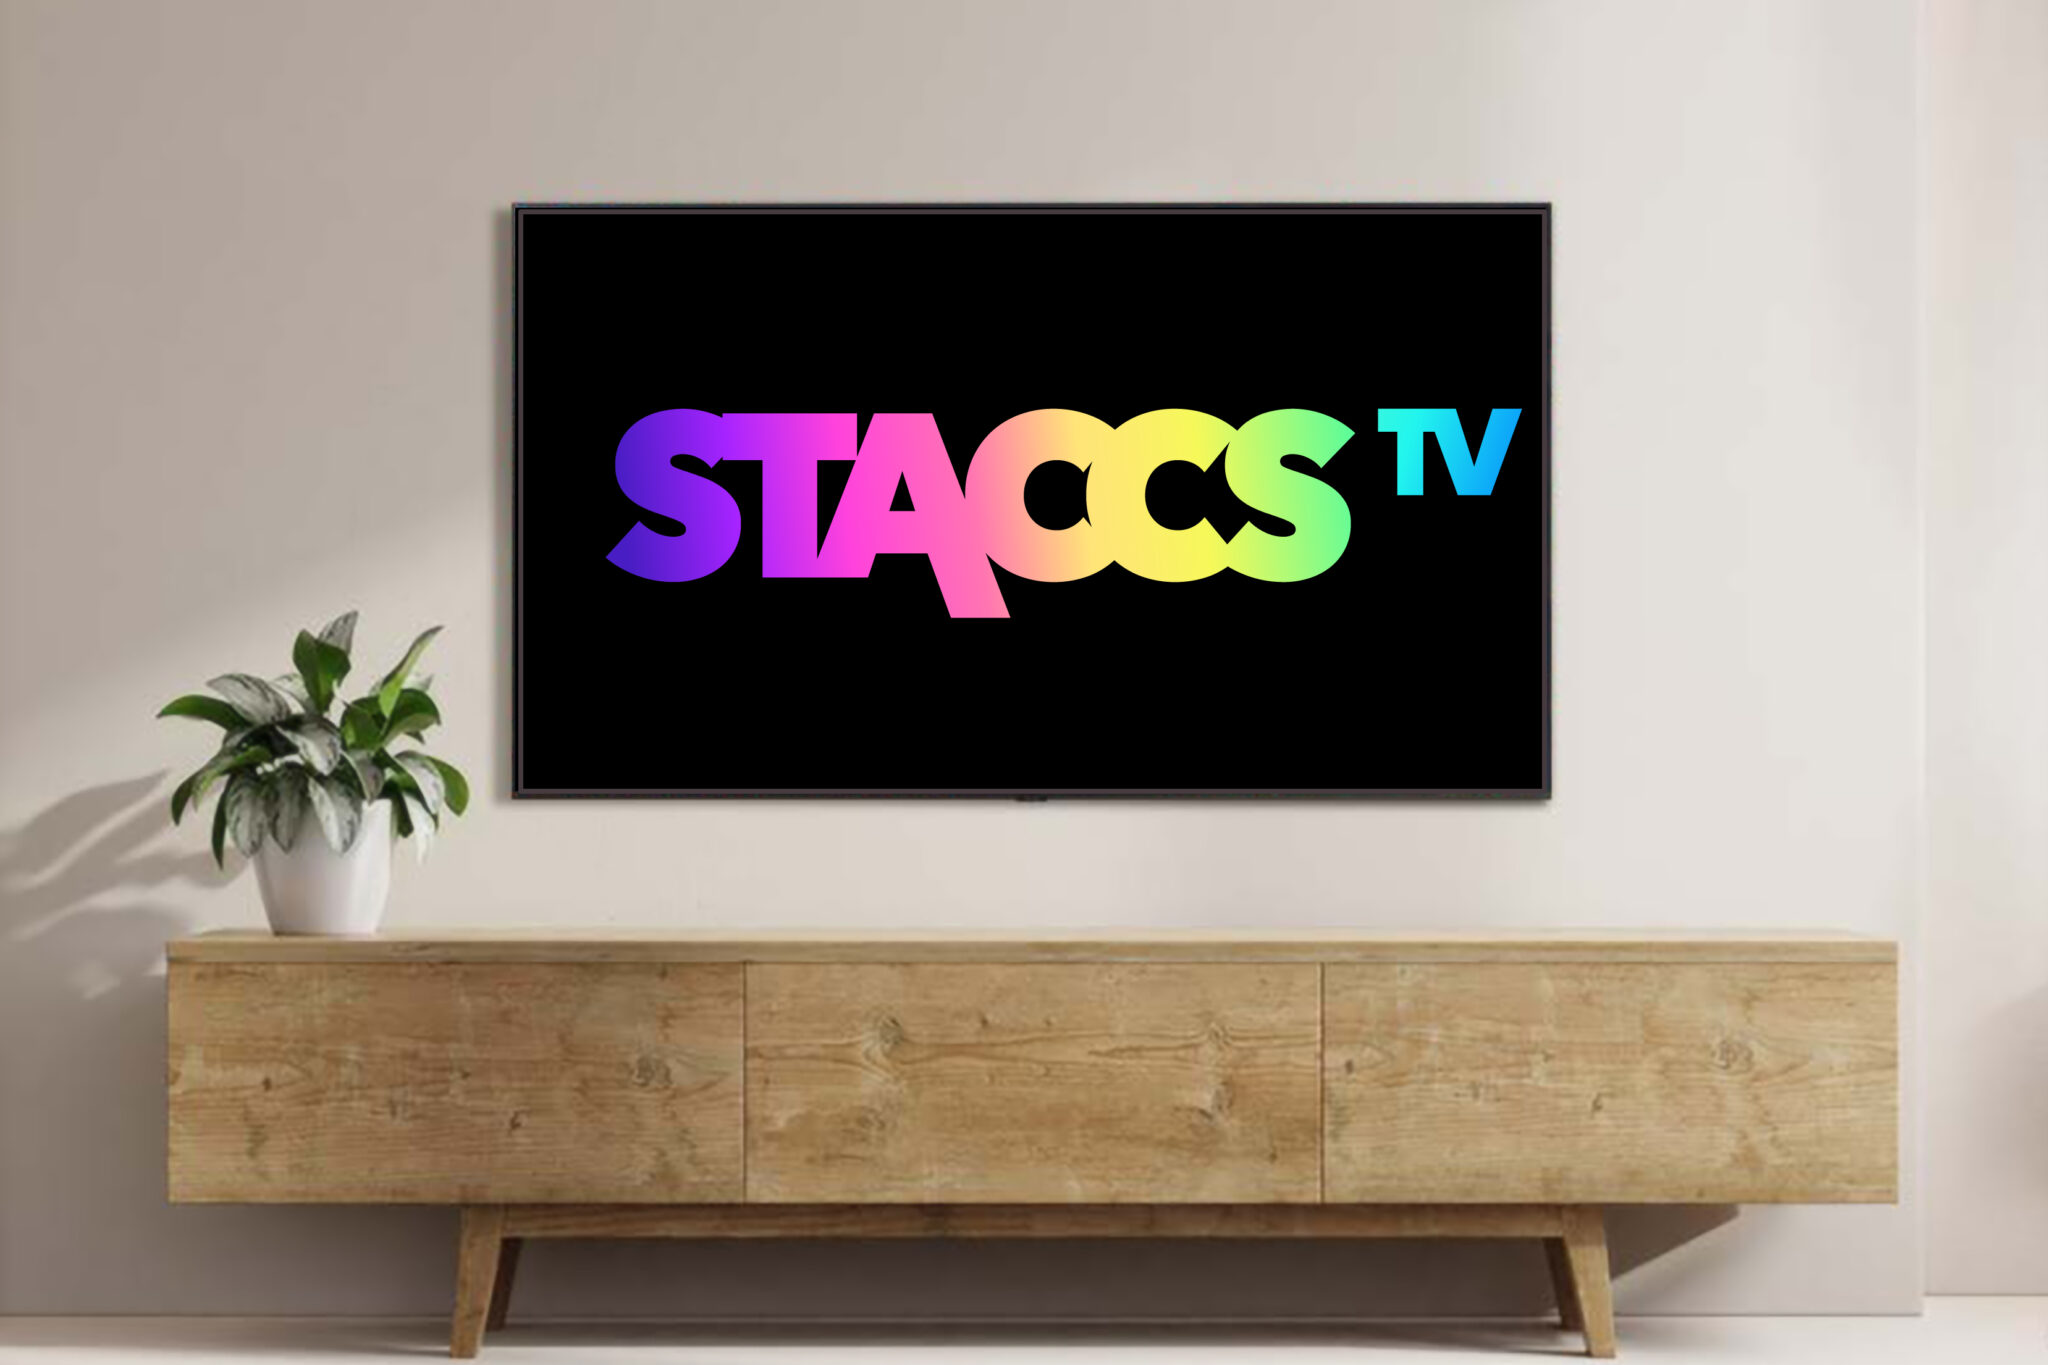  Staccs TV